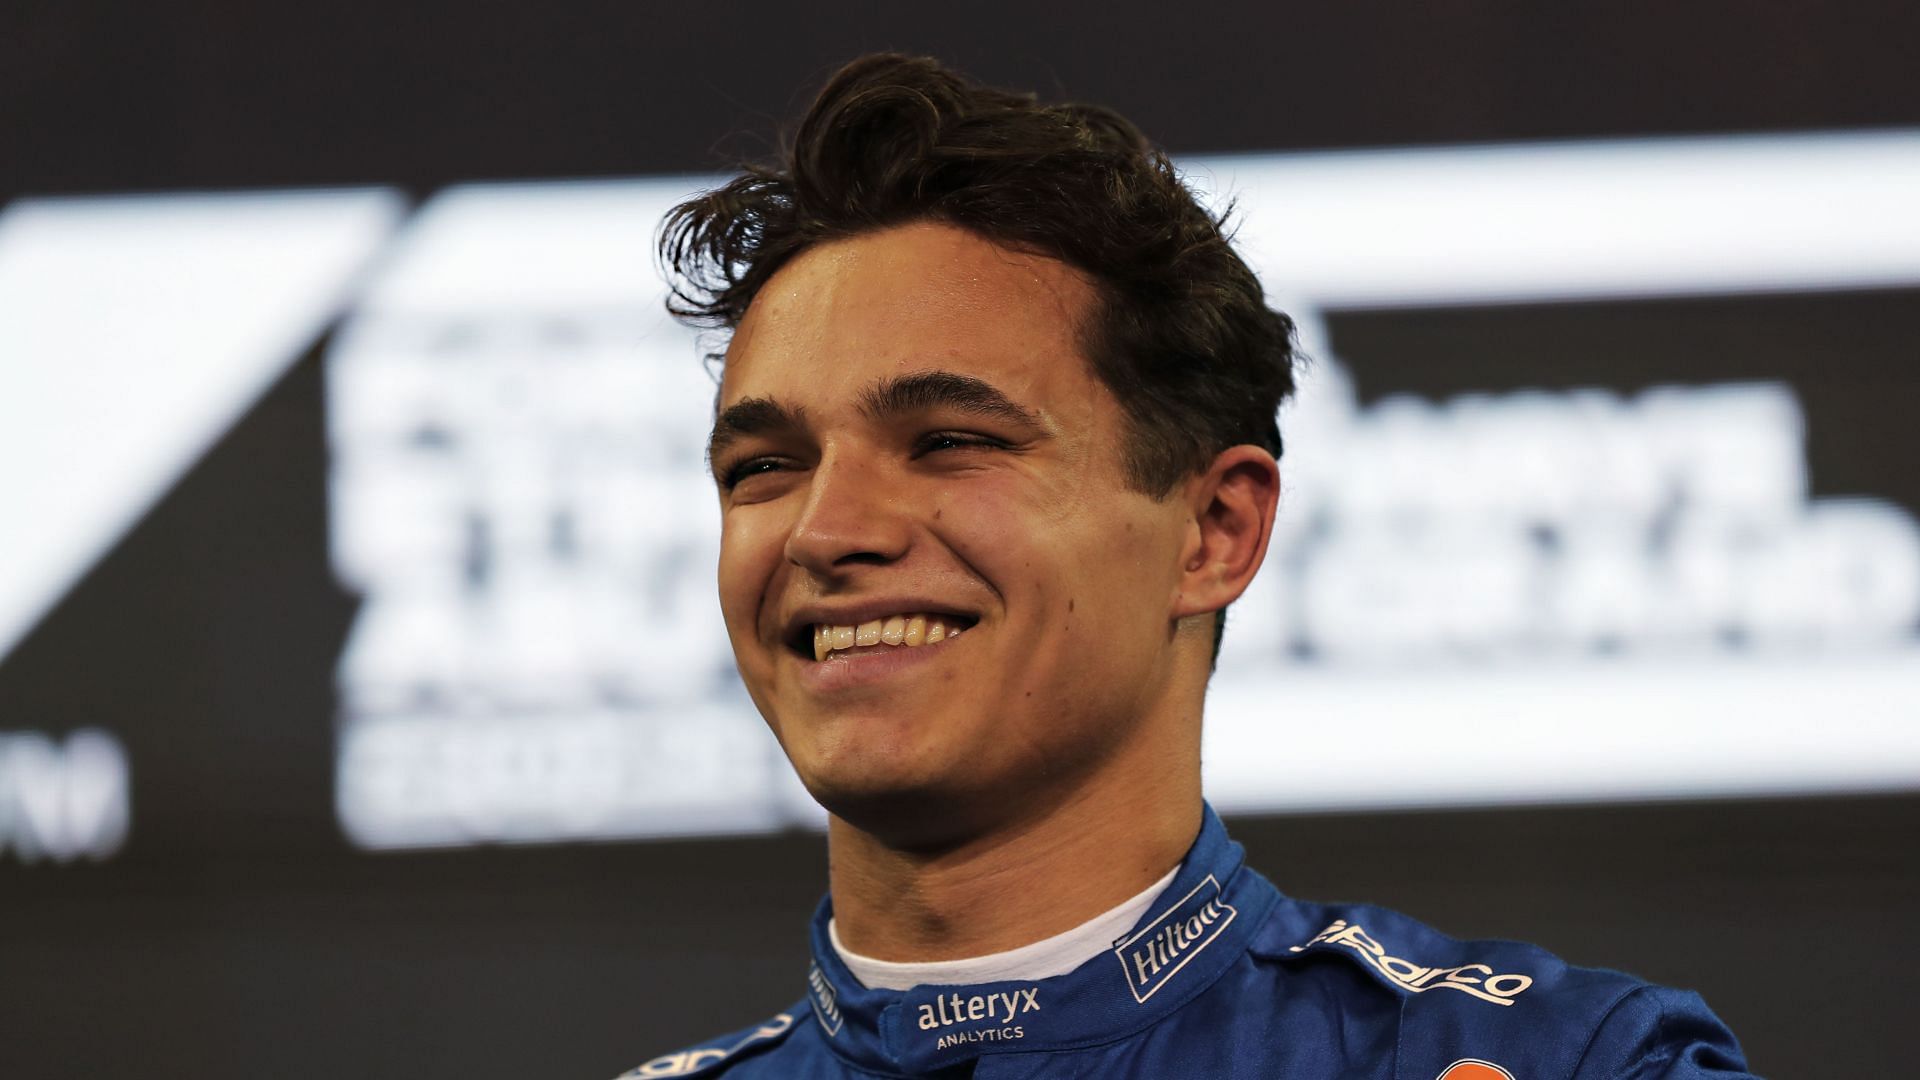 Lando Norris has signed a long-term contract with McLaren (Photo by Kamran Jebreili - Pool/Getty Images)